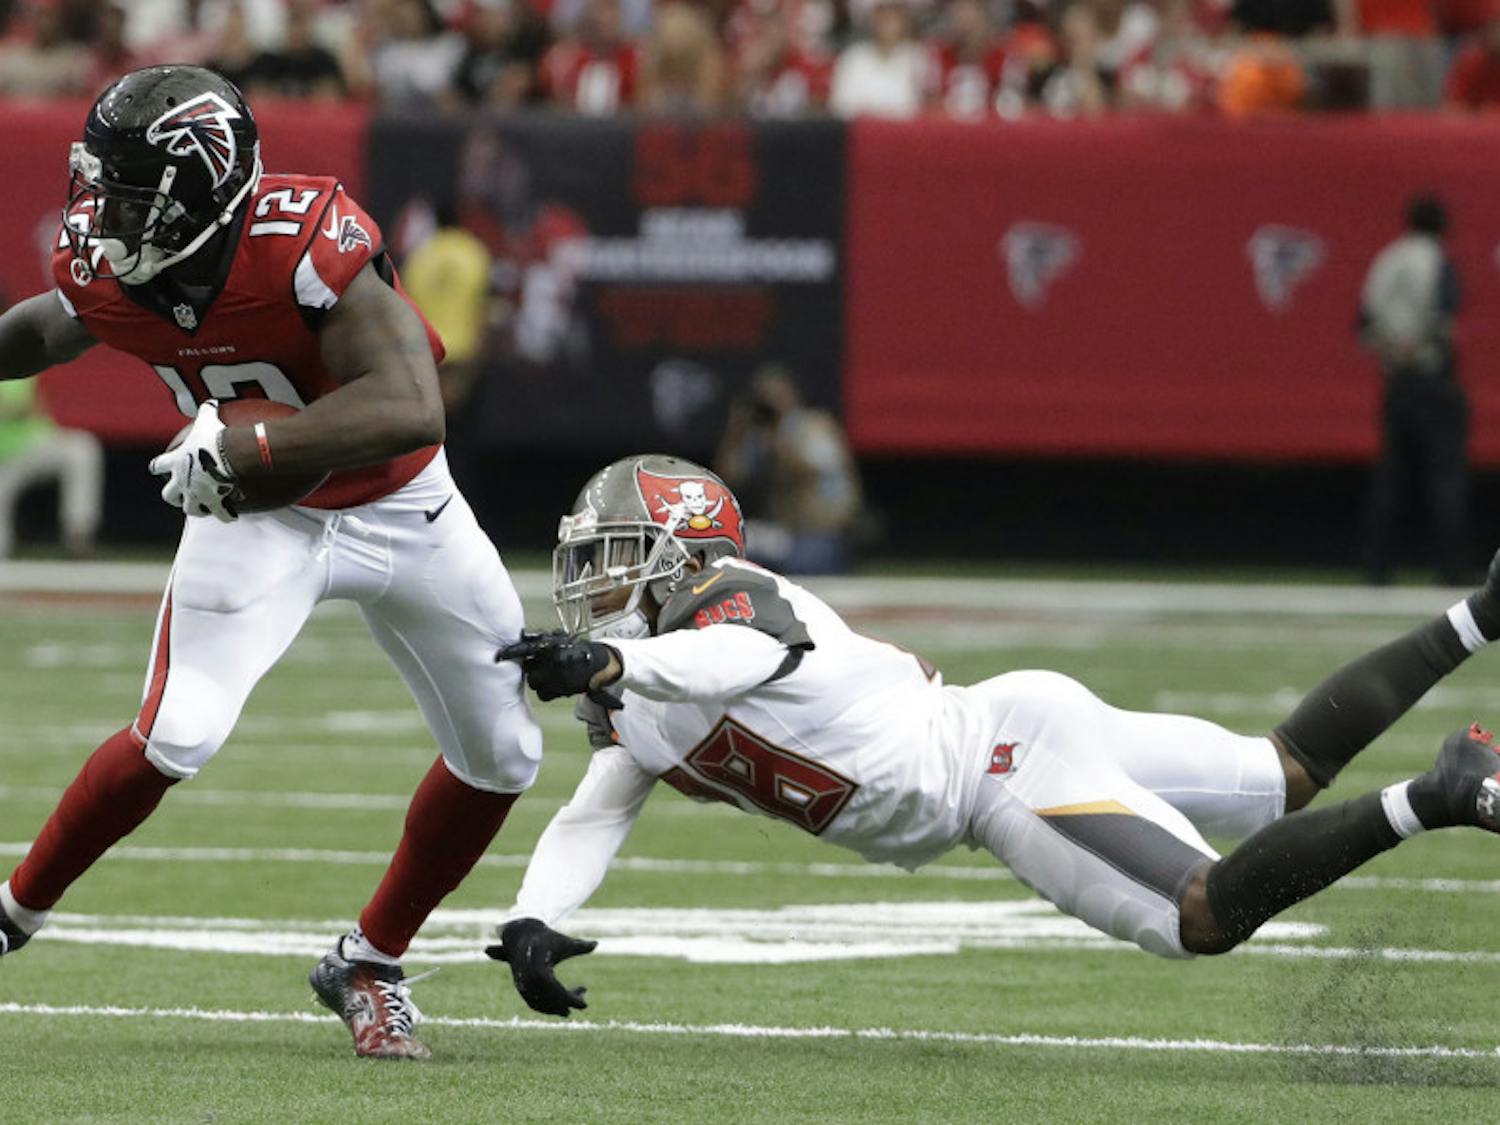 Atlanta Falcons wide receiver Mohamed Sanu (12) moves past Tampa Bay Buccaneers cornerback Vernon Hargreaves (28) during the second half of an NFL football game, Sunday, Sept. 11, 2016, in Atlanta. (AP Photo/David Goldman)